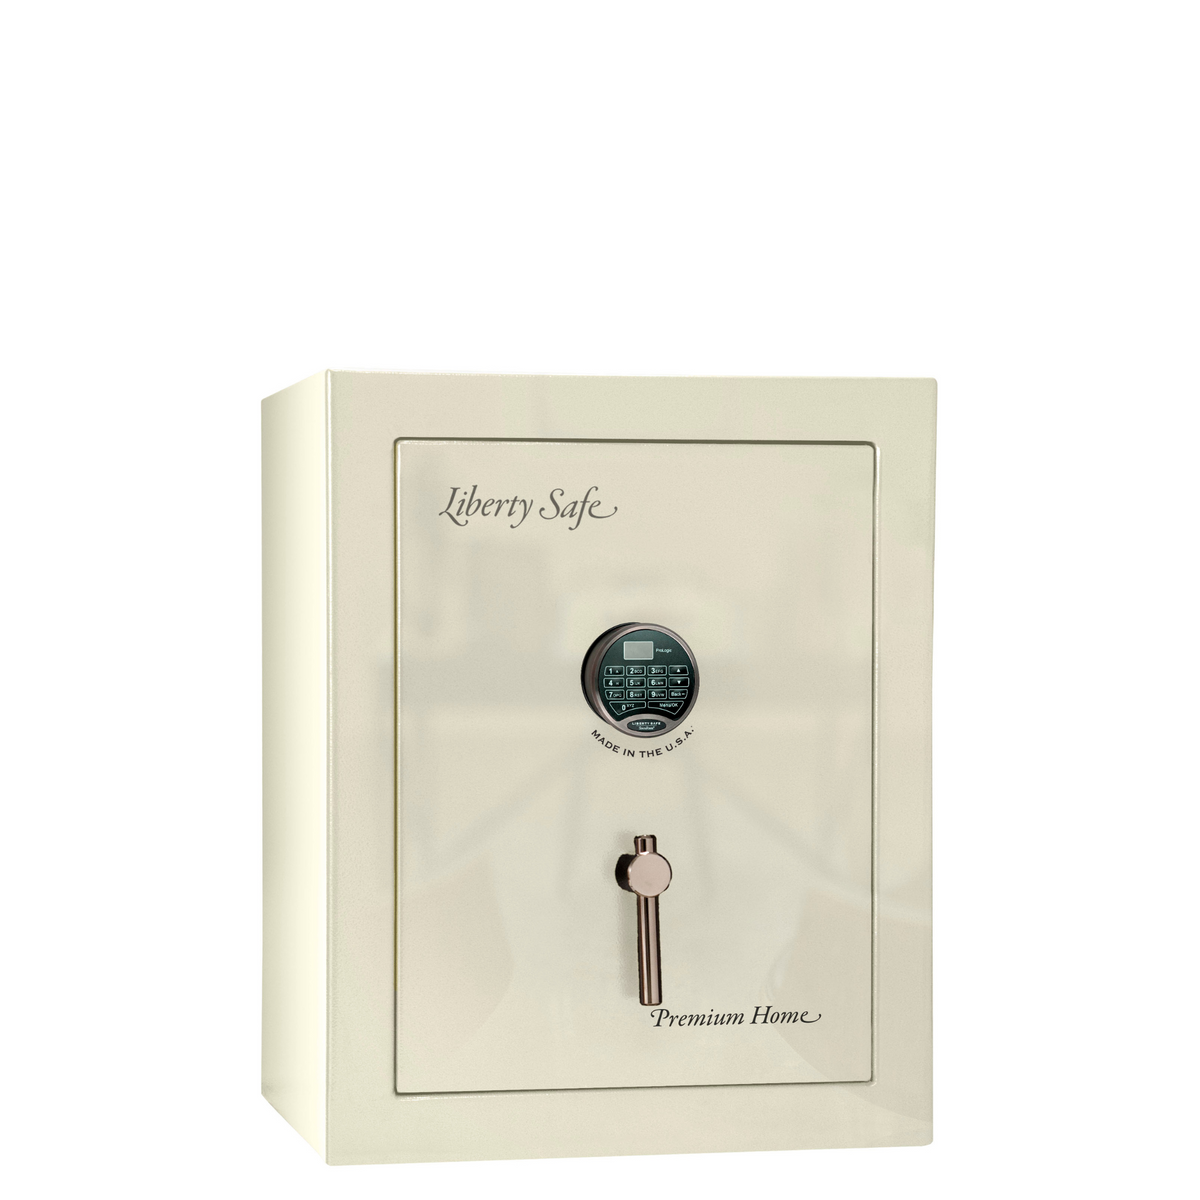 Premium Home Series | Level 7 Security | 2 Hour Fire Protection | 08 | Dimensions: 30&quot;(H) x 24&quot;(W) x 20.25&quot;(D) | White Gloss - Closed Door